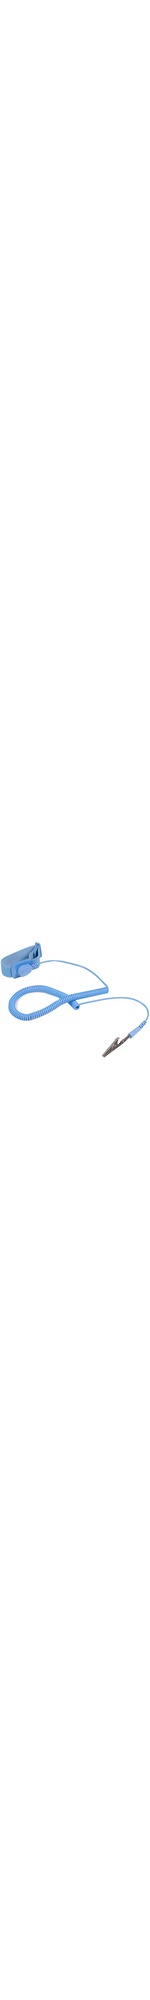 StarTech.com ESD Anti Static Wrist Strap Band with Grounding Wire